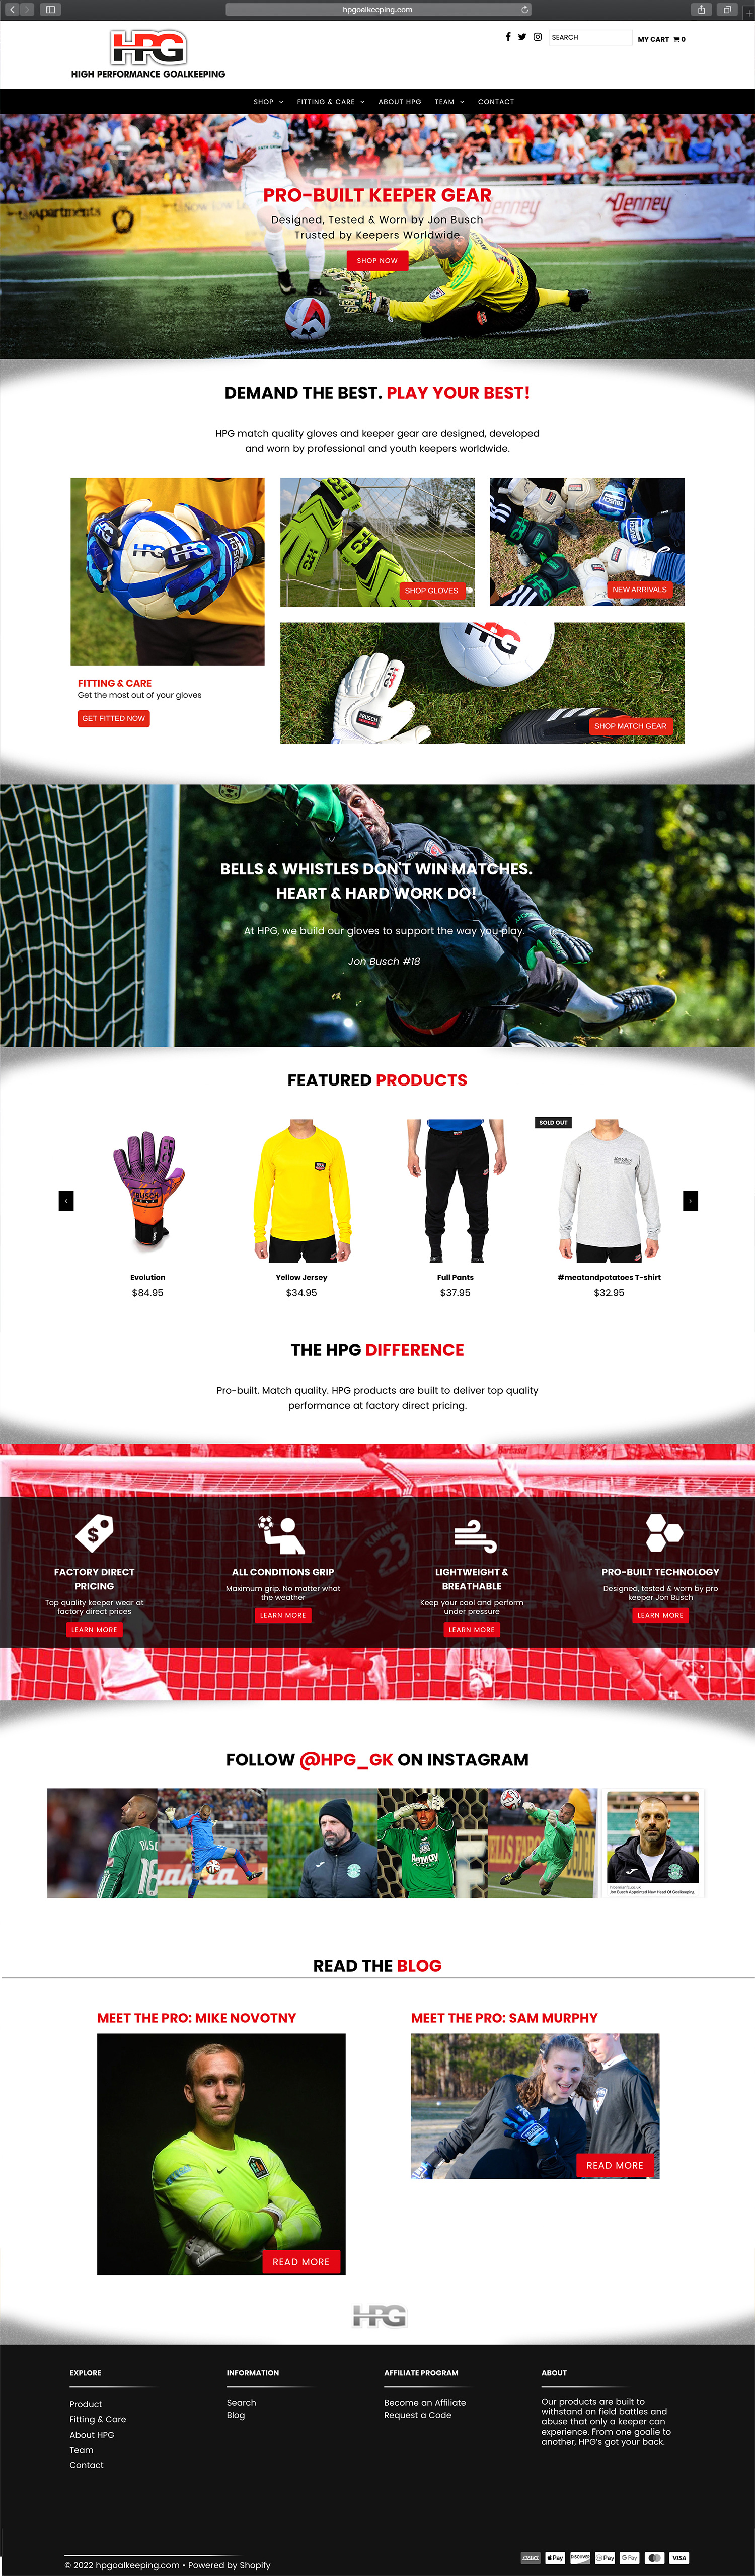 Website design and website development for HPG - homepage view.